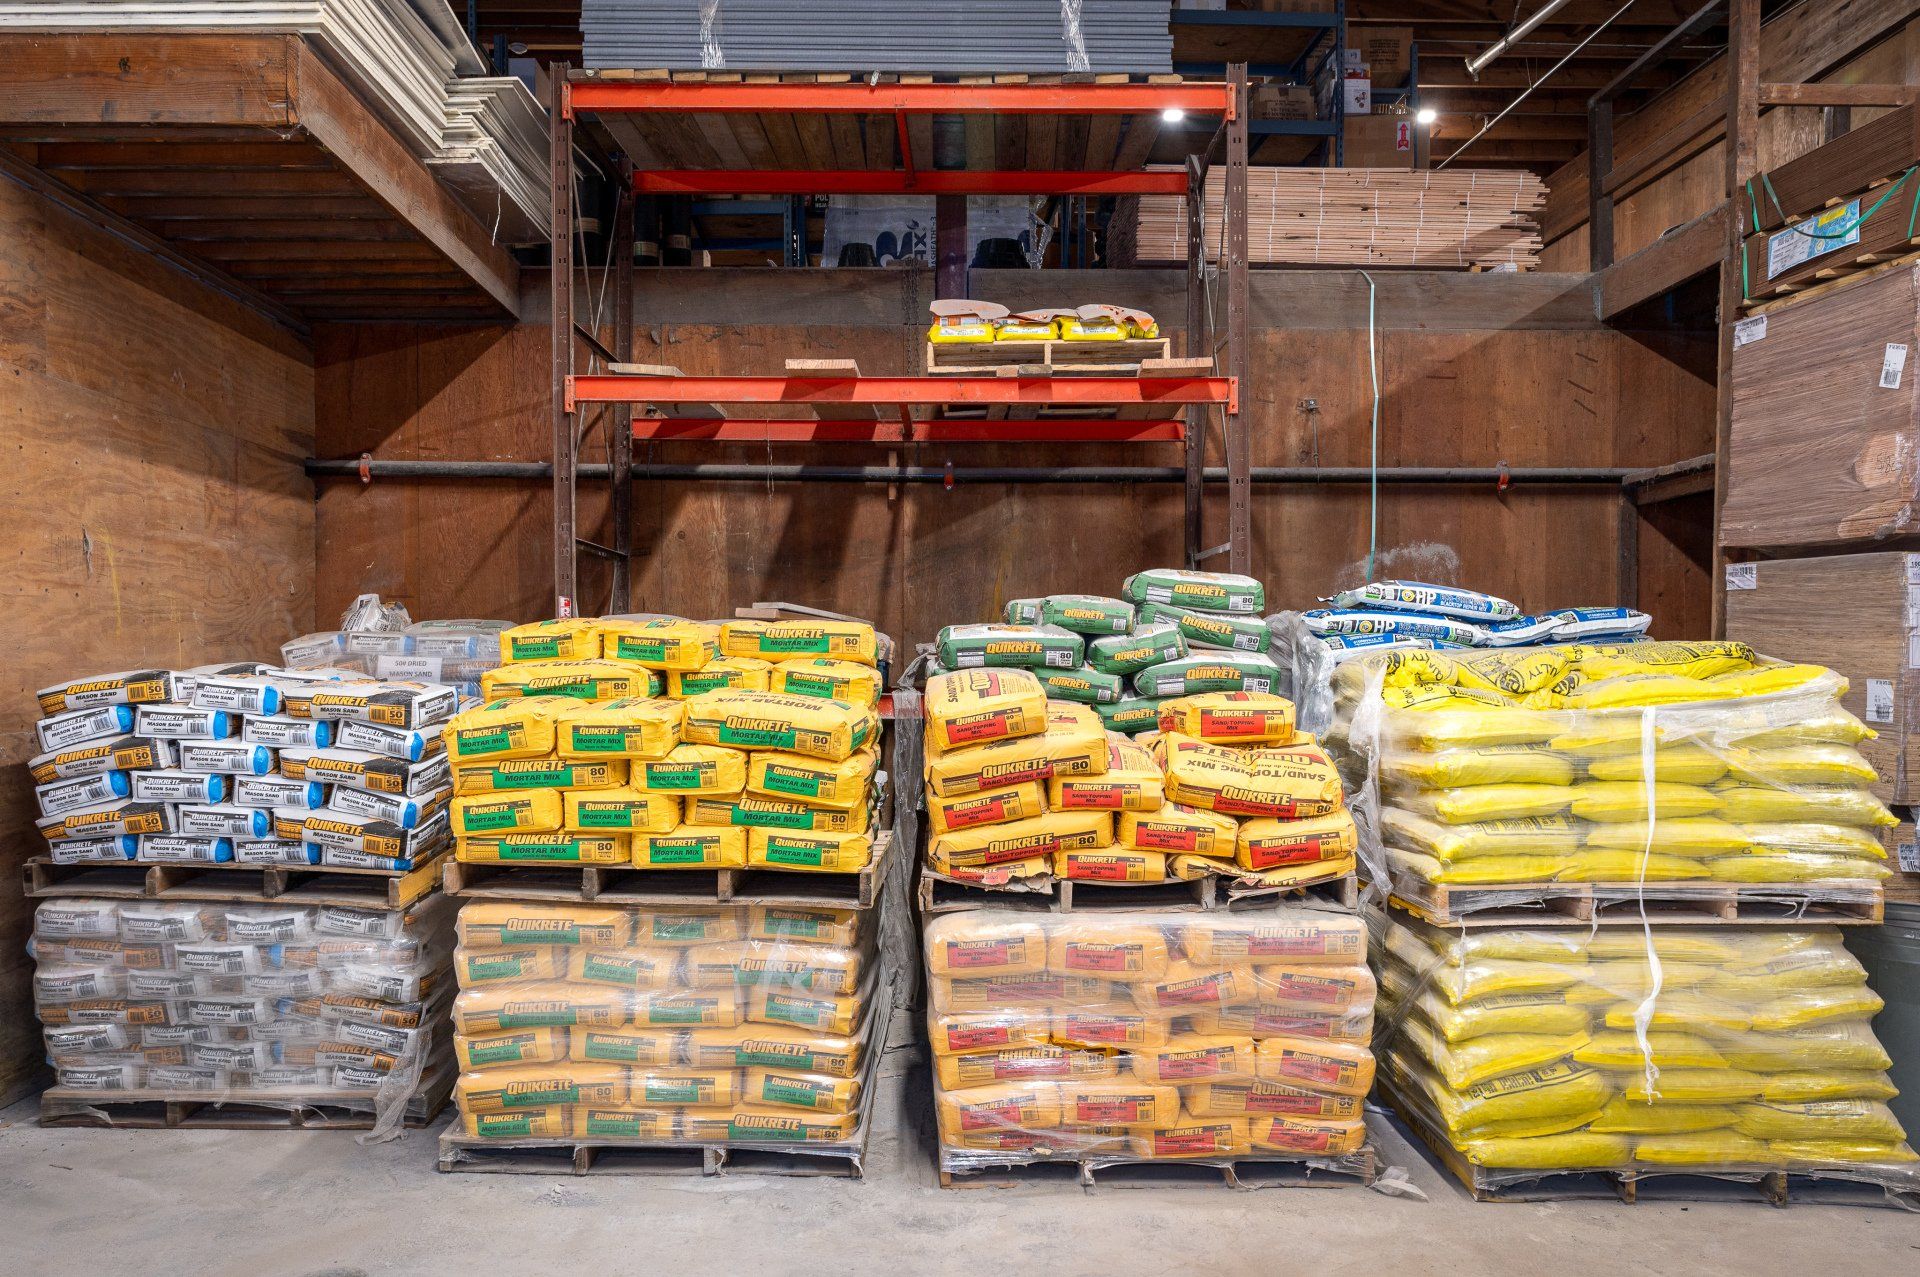 A warehouse filled with lots of bags of various types of fertilizer.